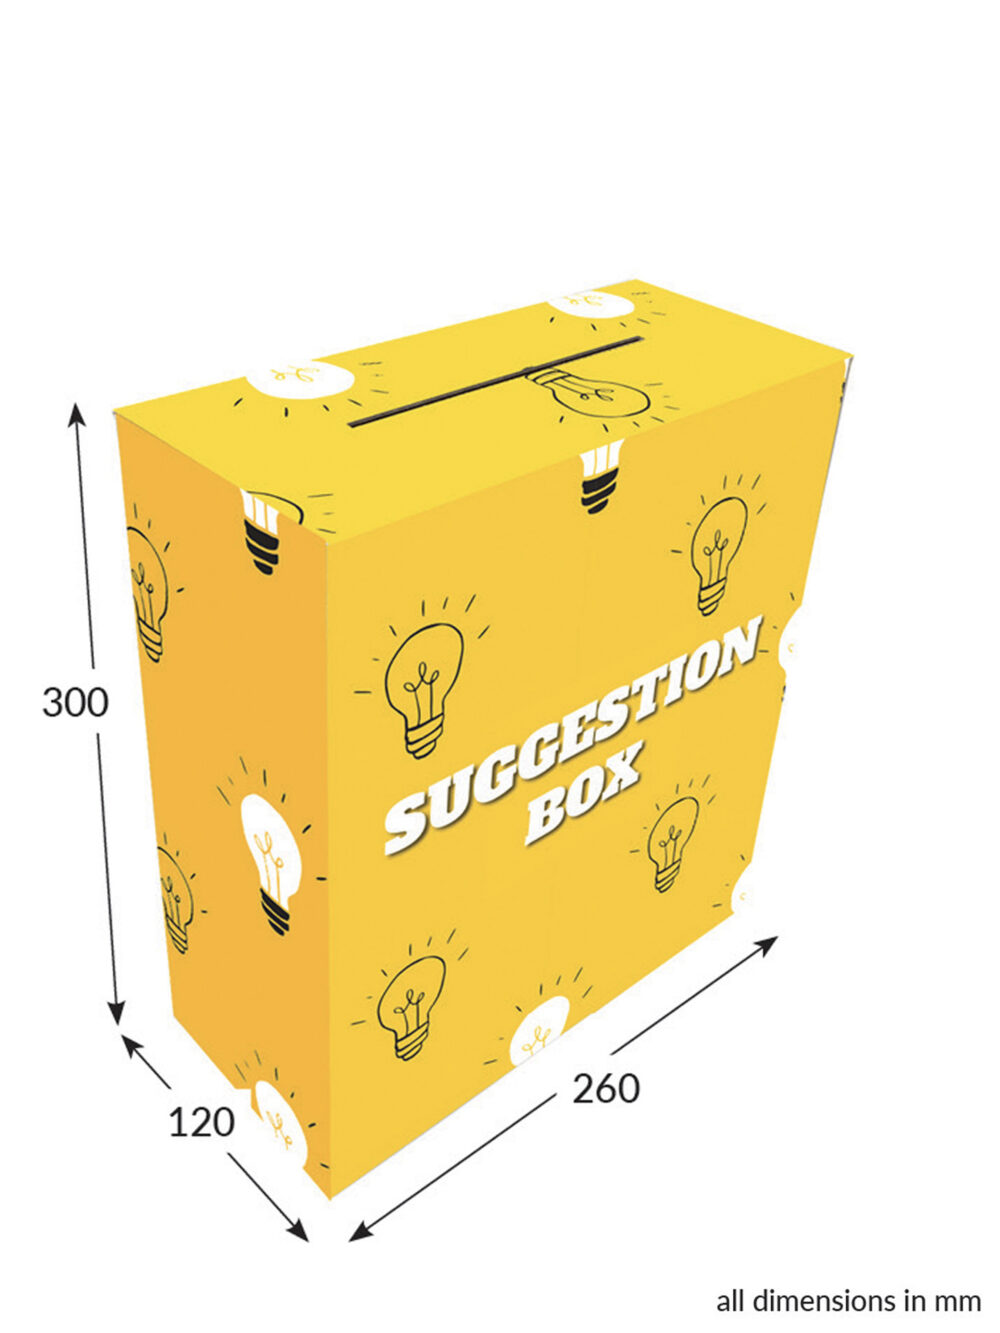 Featured image for “Ballot Box Large - Suggestions Box”